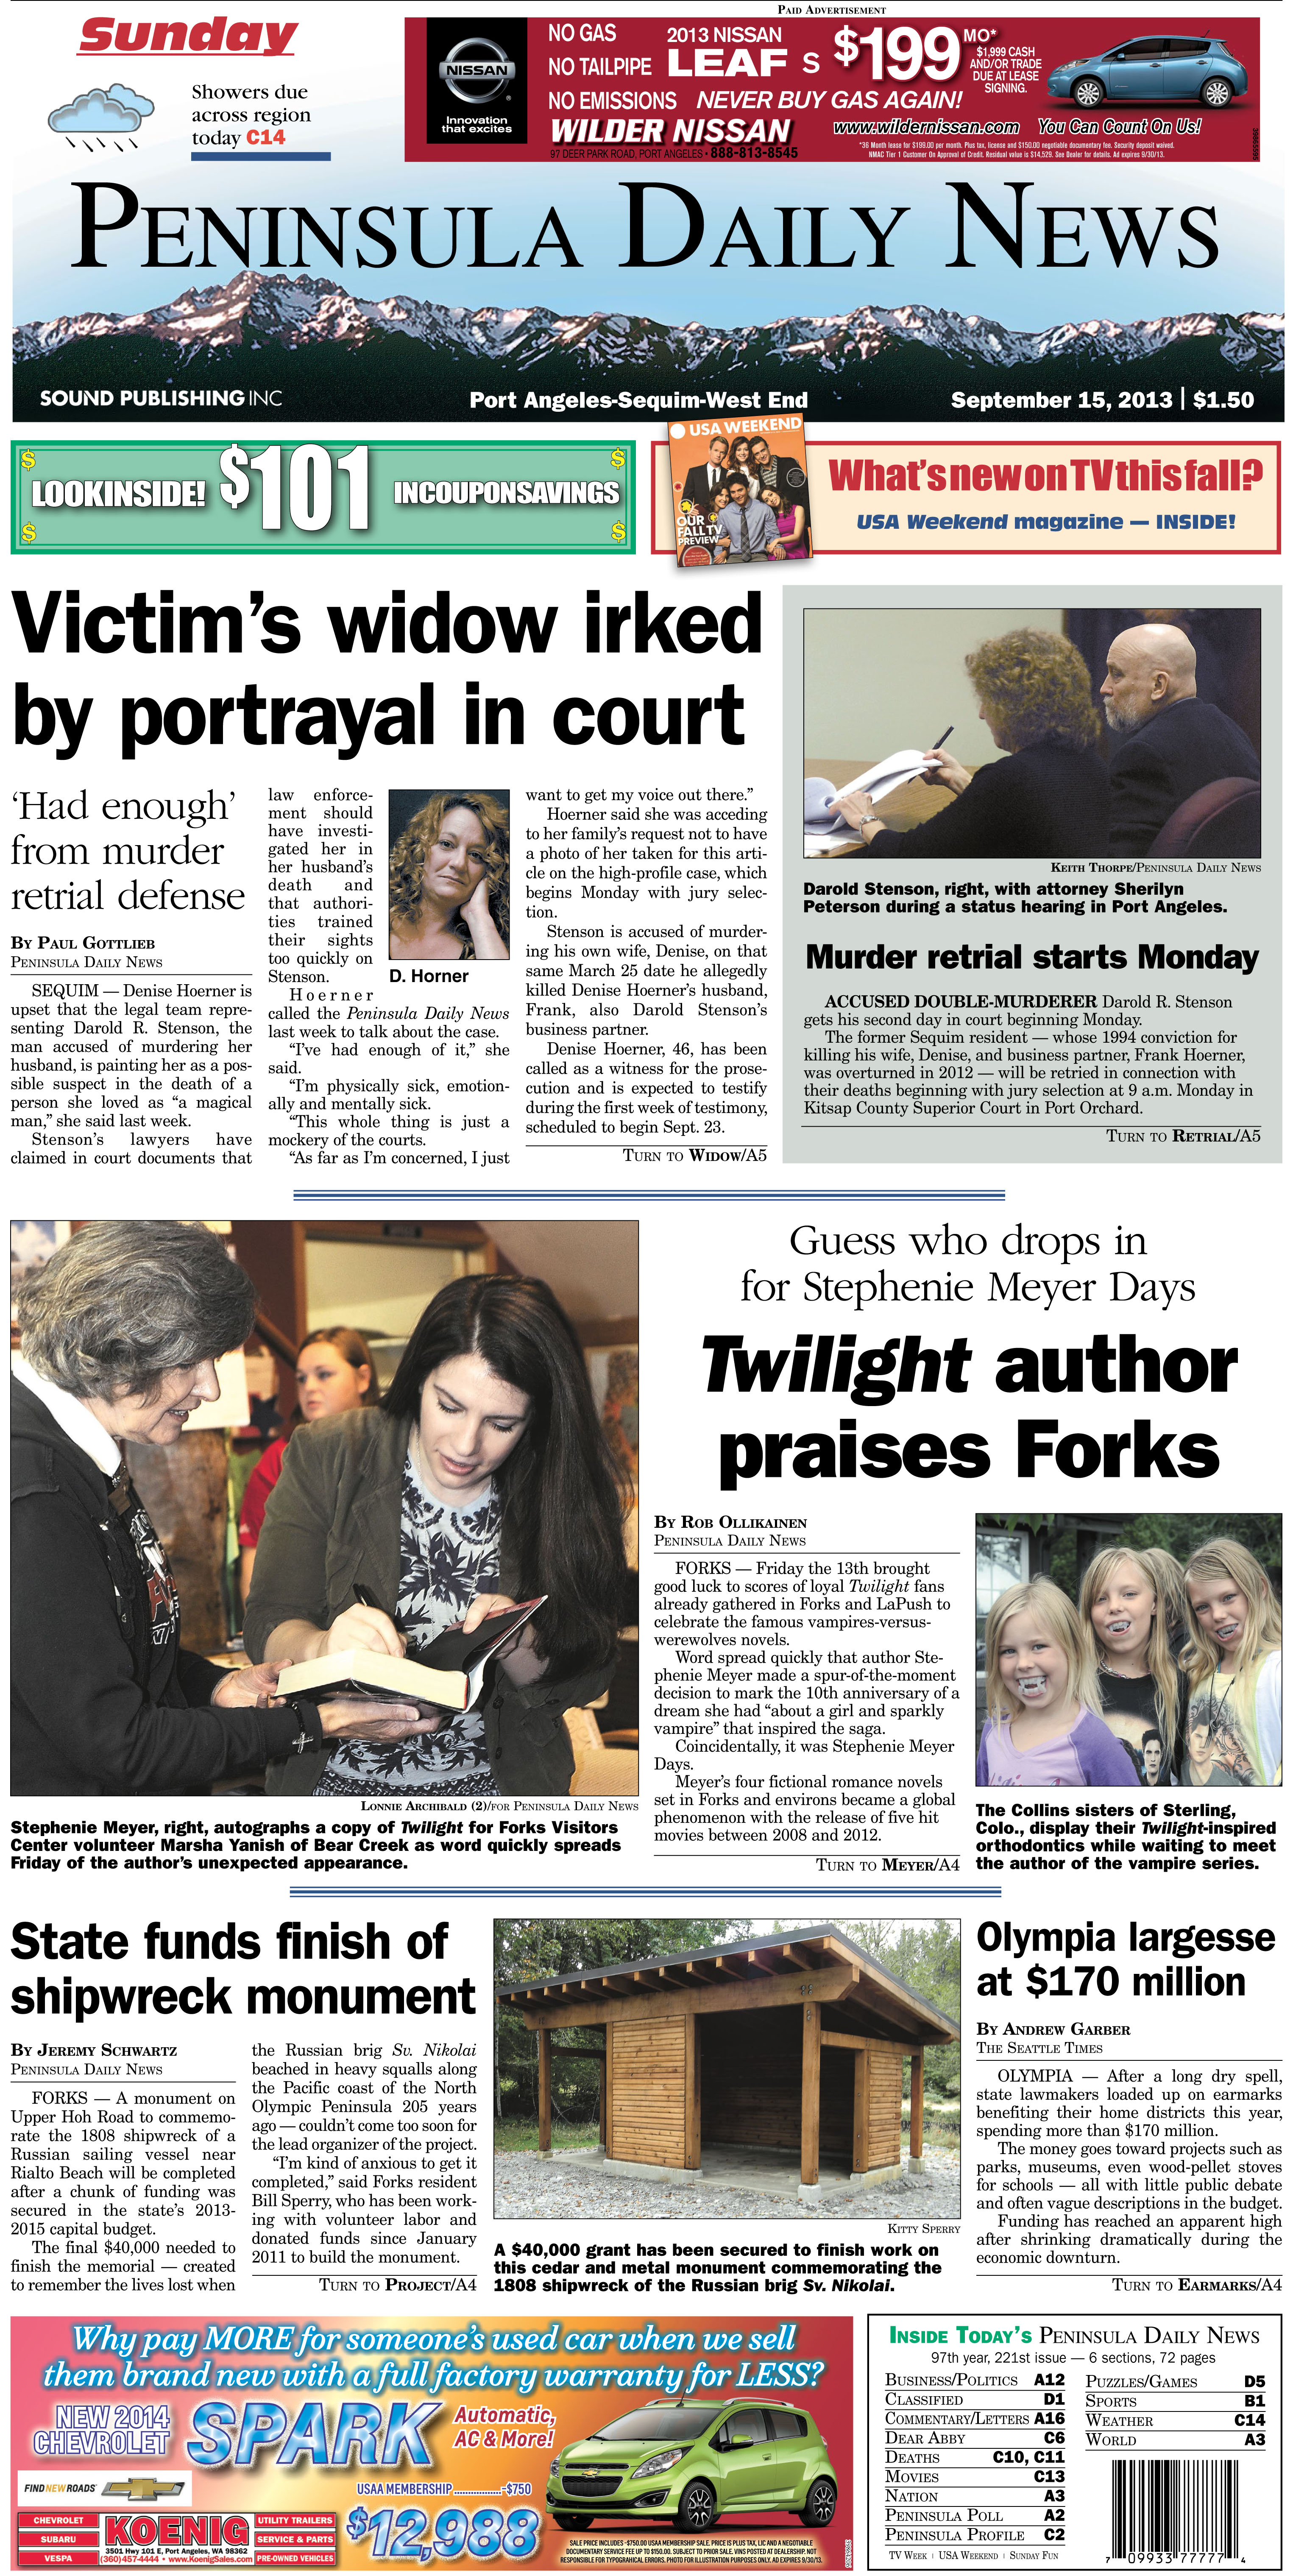 Sunday's Page 1 for our Clallam County readers. (Click on image to enlarge)